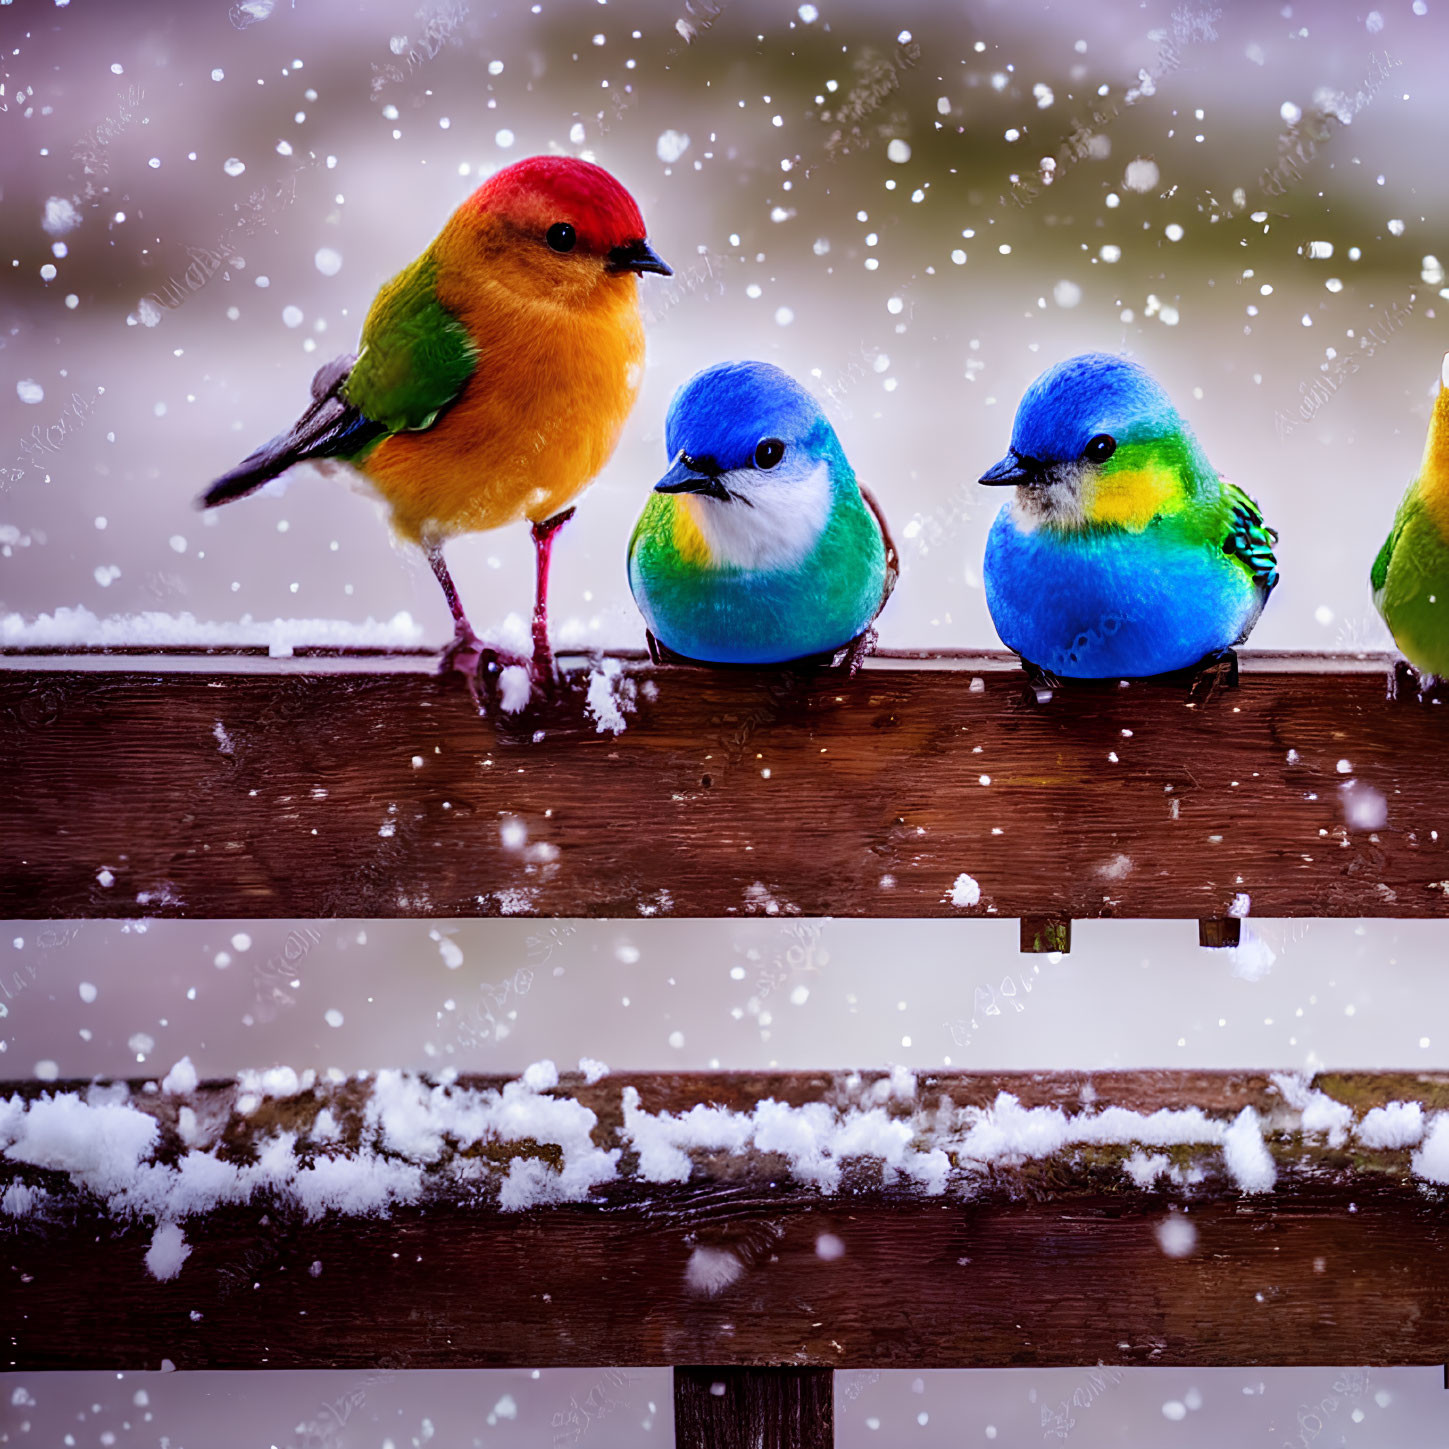 Vibrant birds on wooden fence with falling snowflakes